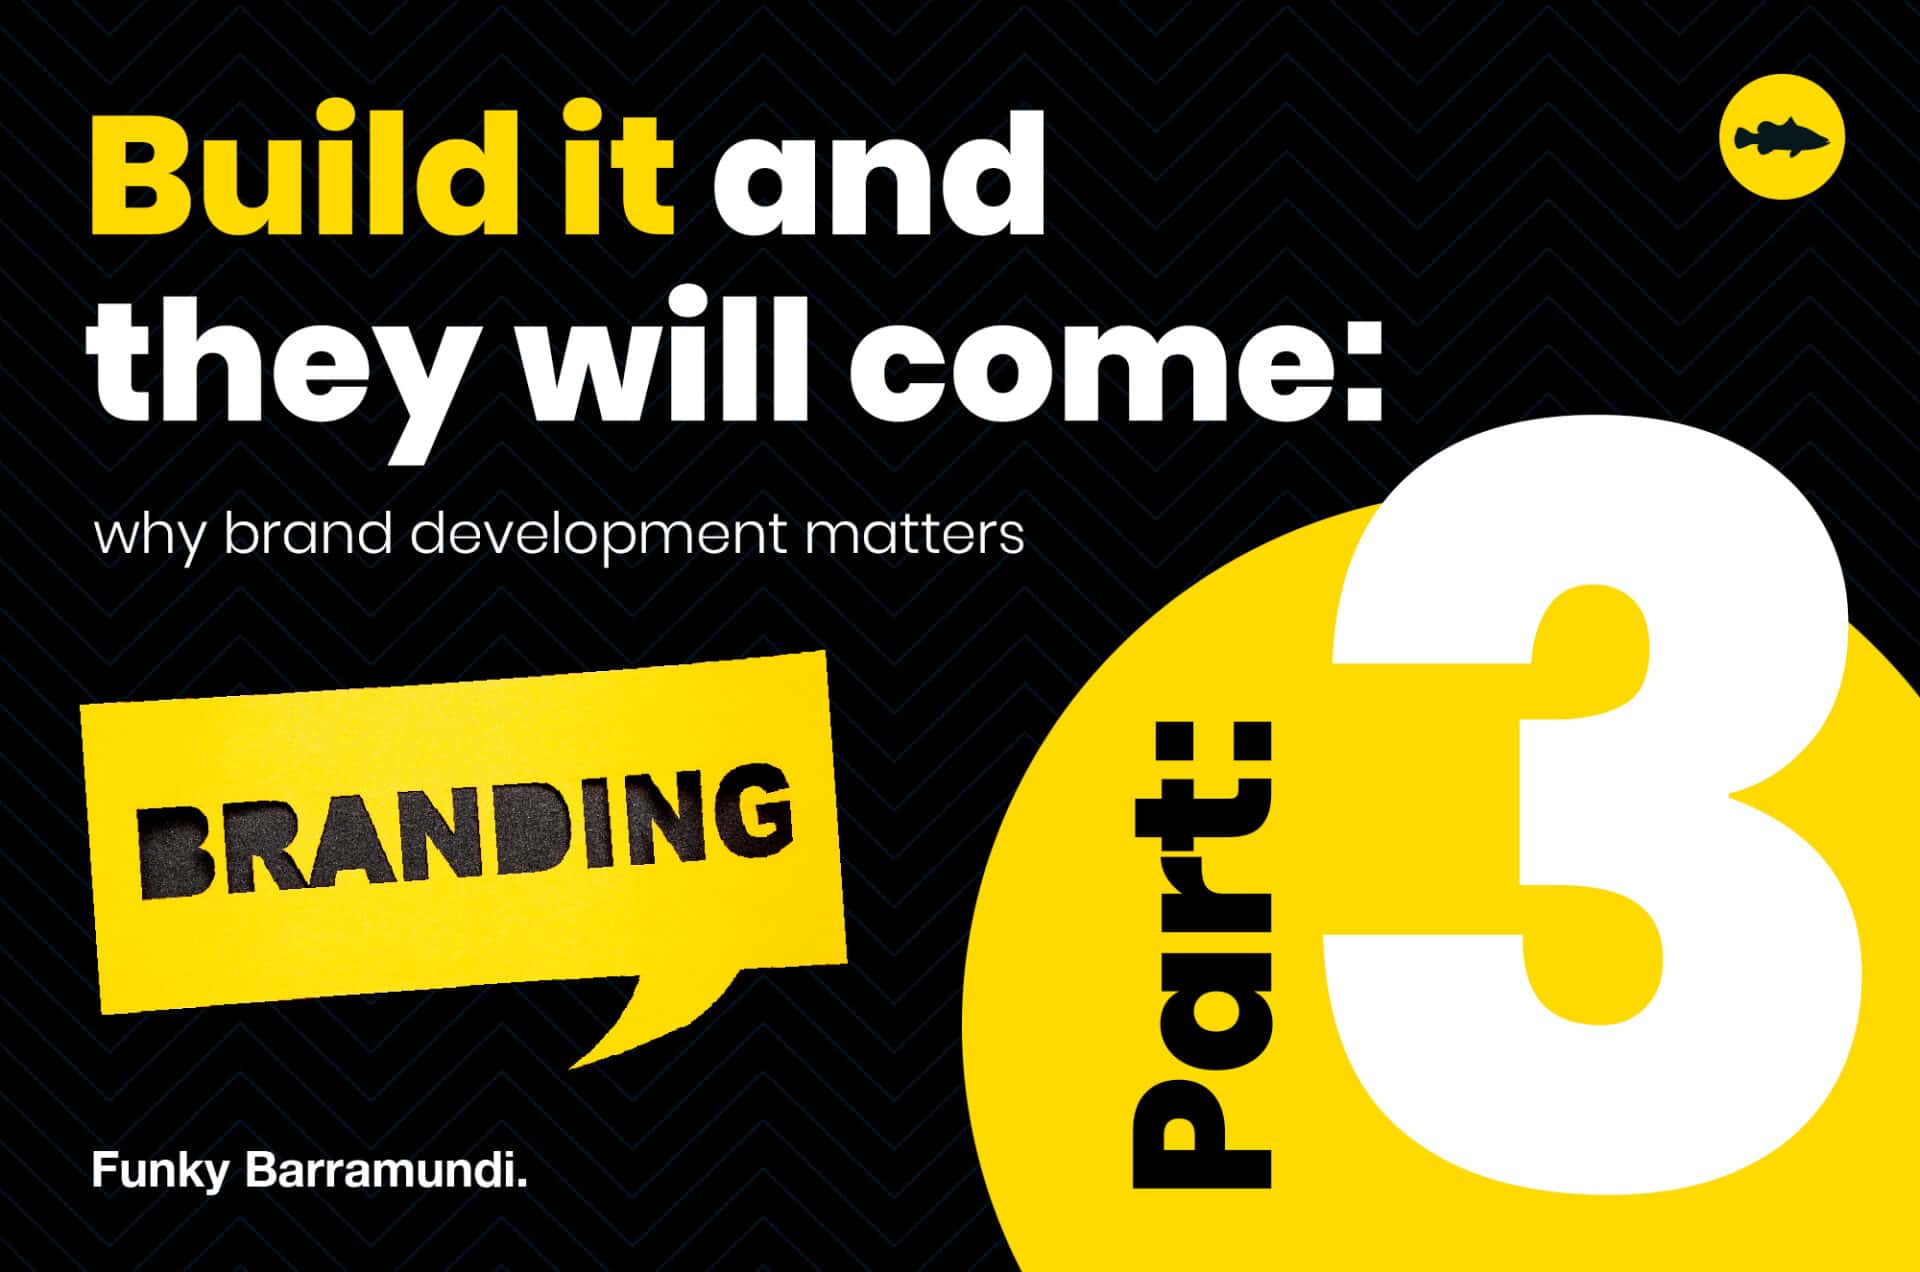 Part 3: Build it and they will come: why brand development matters